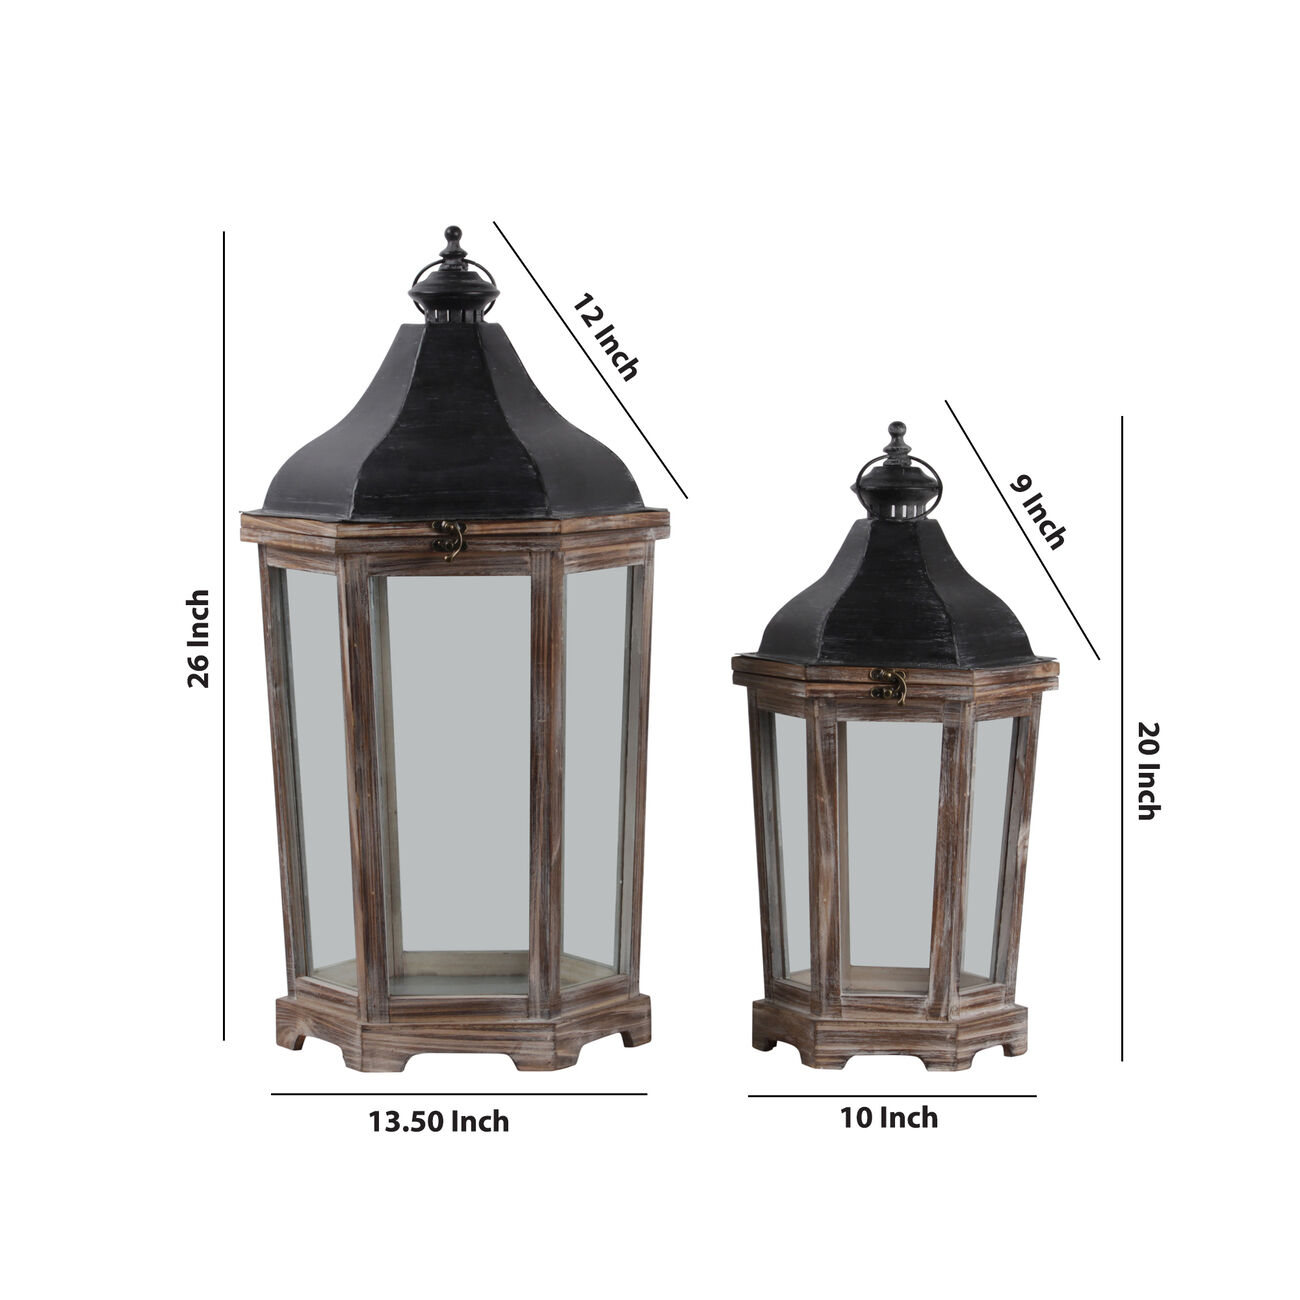 Wood and Metal Lanterns with Ring Handle, Brown and Black, Set of 2